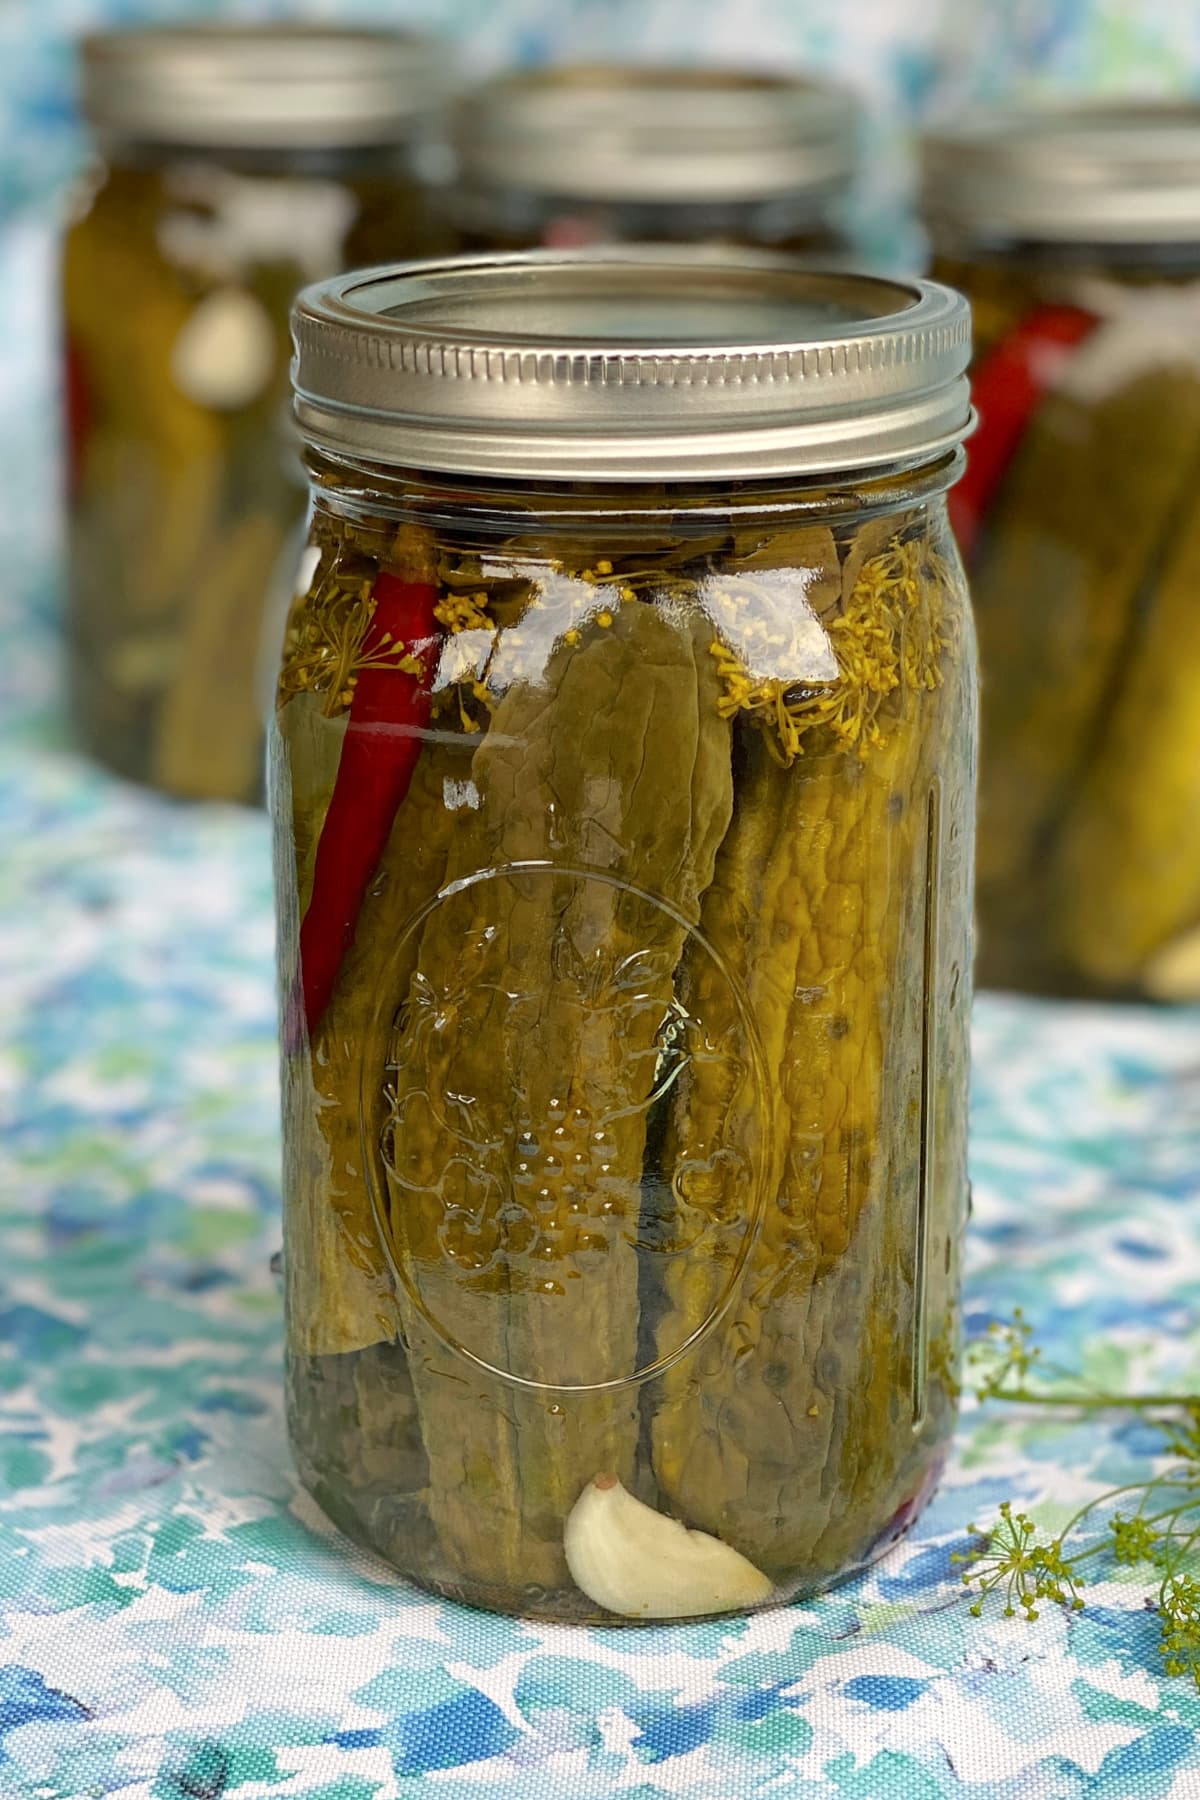 Spicy Garlic Dill Pickles